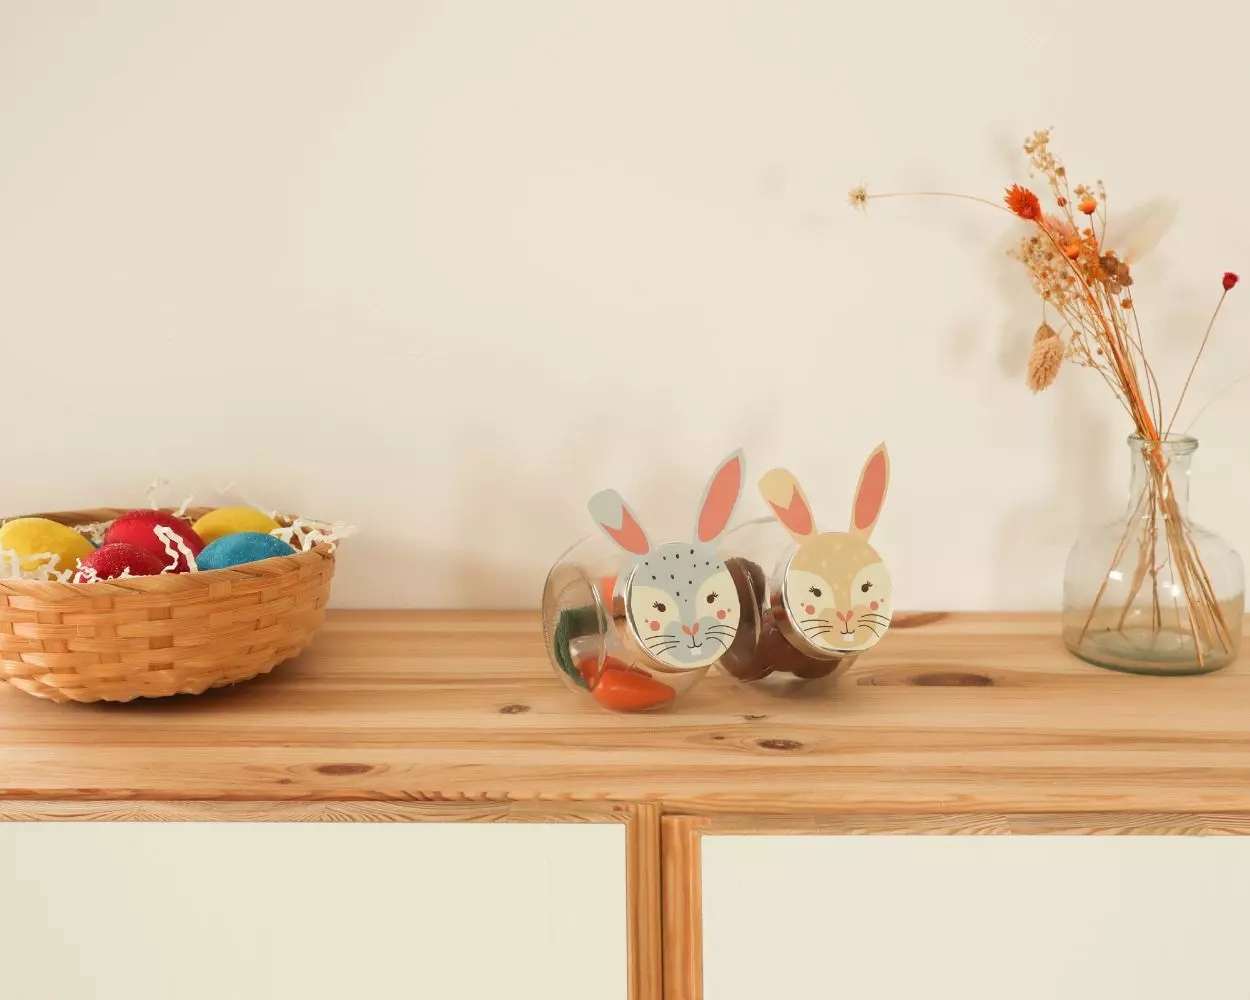 Crafting Easter decorations with children